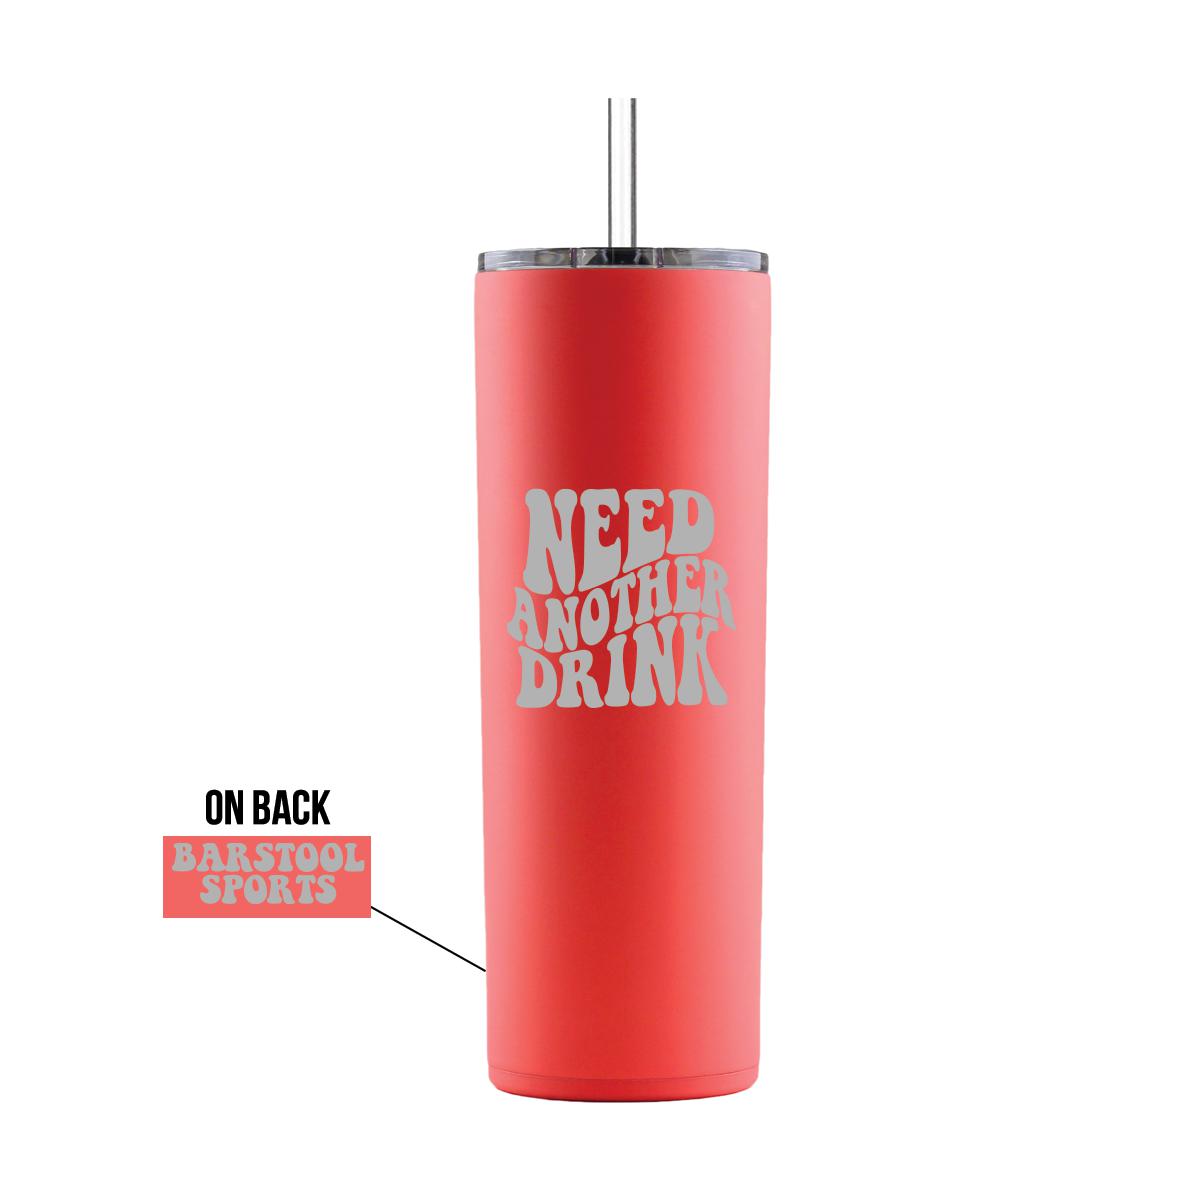 Need Another Drink 20oz Skinny Tumbler-Drinkware-PlanBri Uncut-One Size-Coral-Barstool Sports